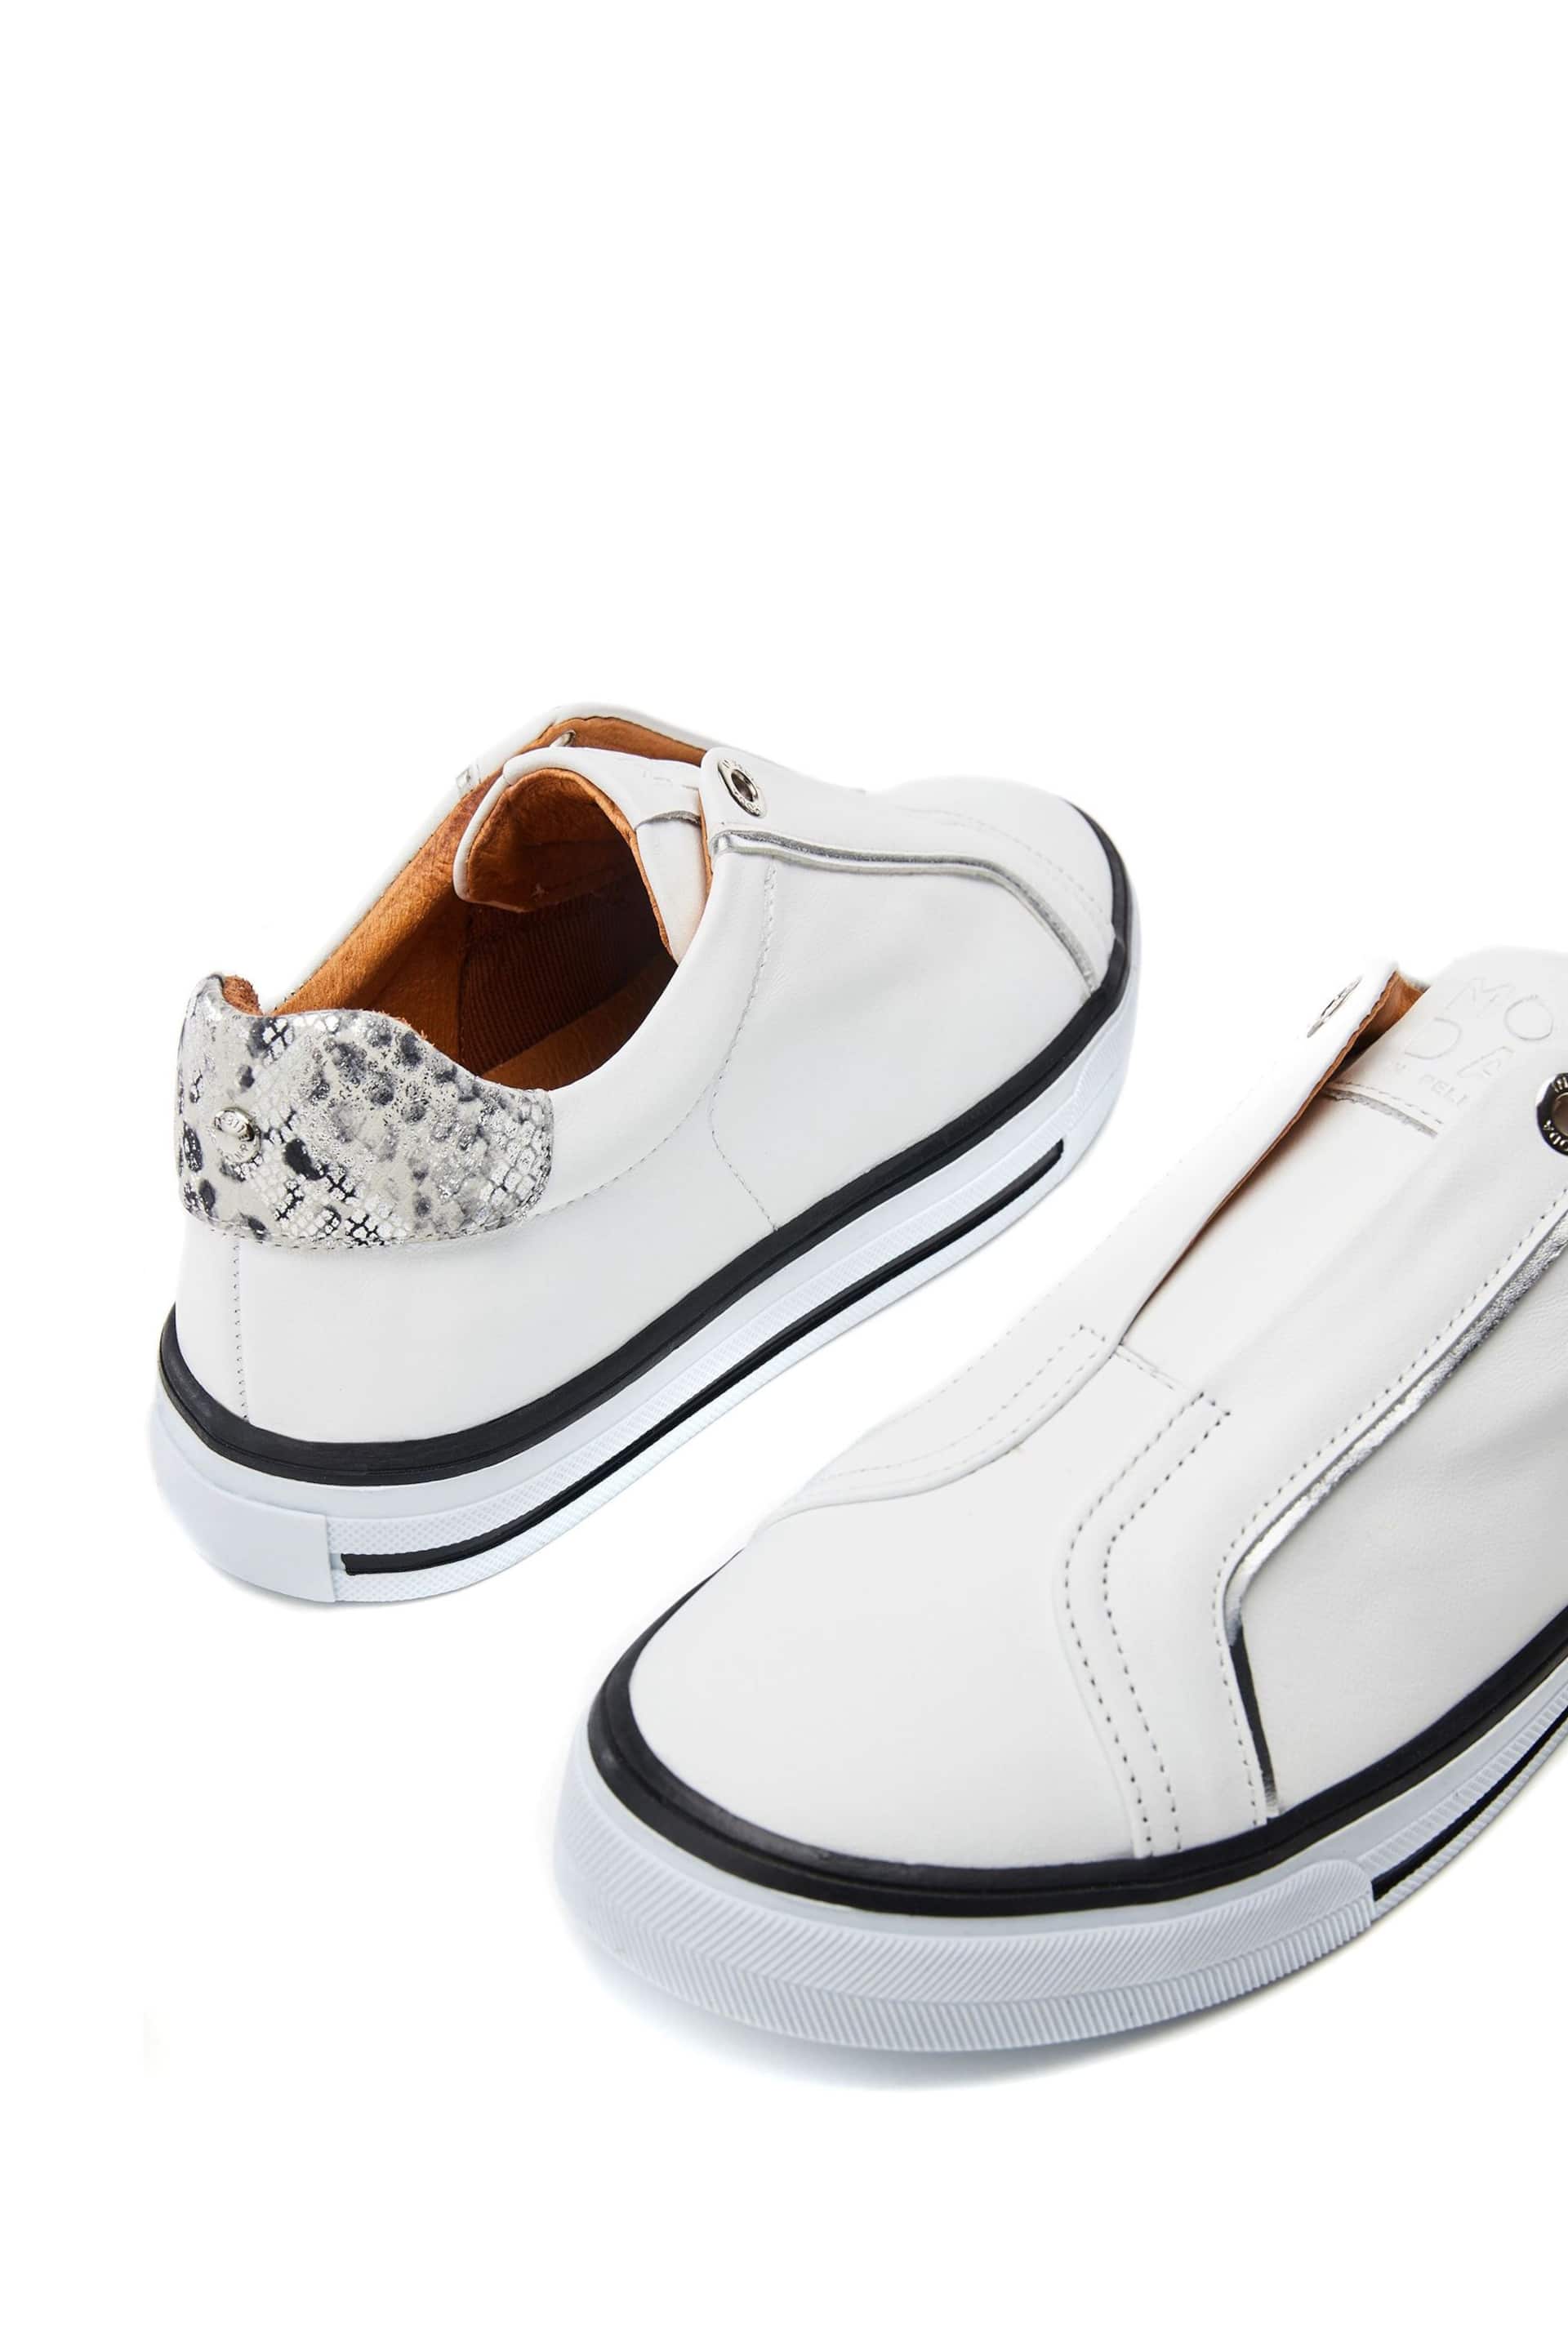 Moda in Pelle Bennii Elastic White Slip-Ons With Foxing Sole - Image 3 of 4